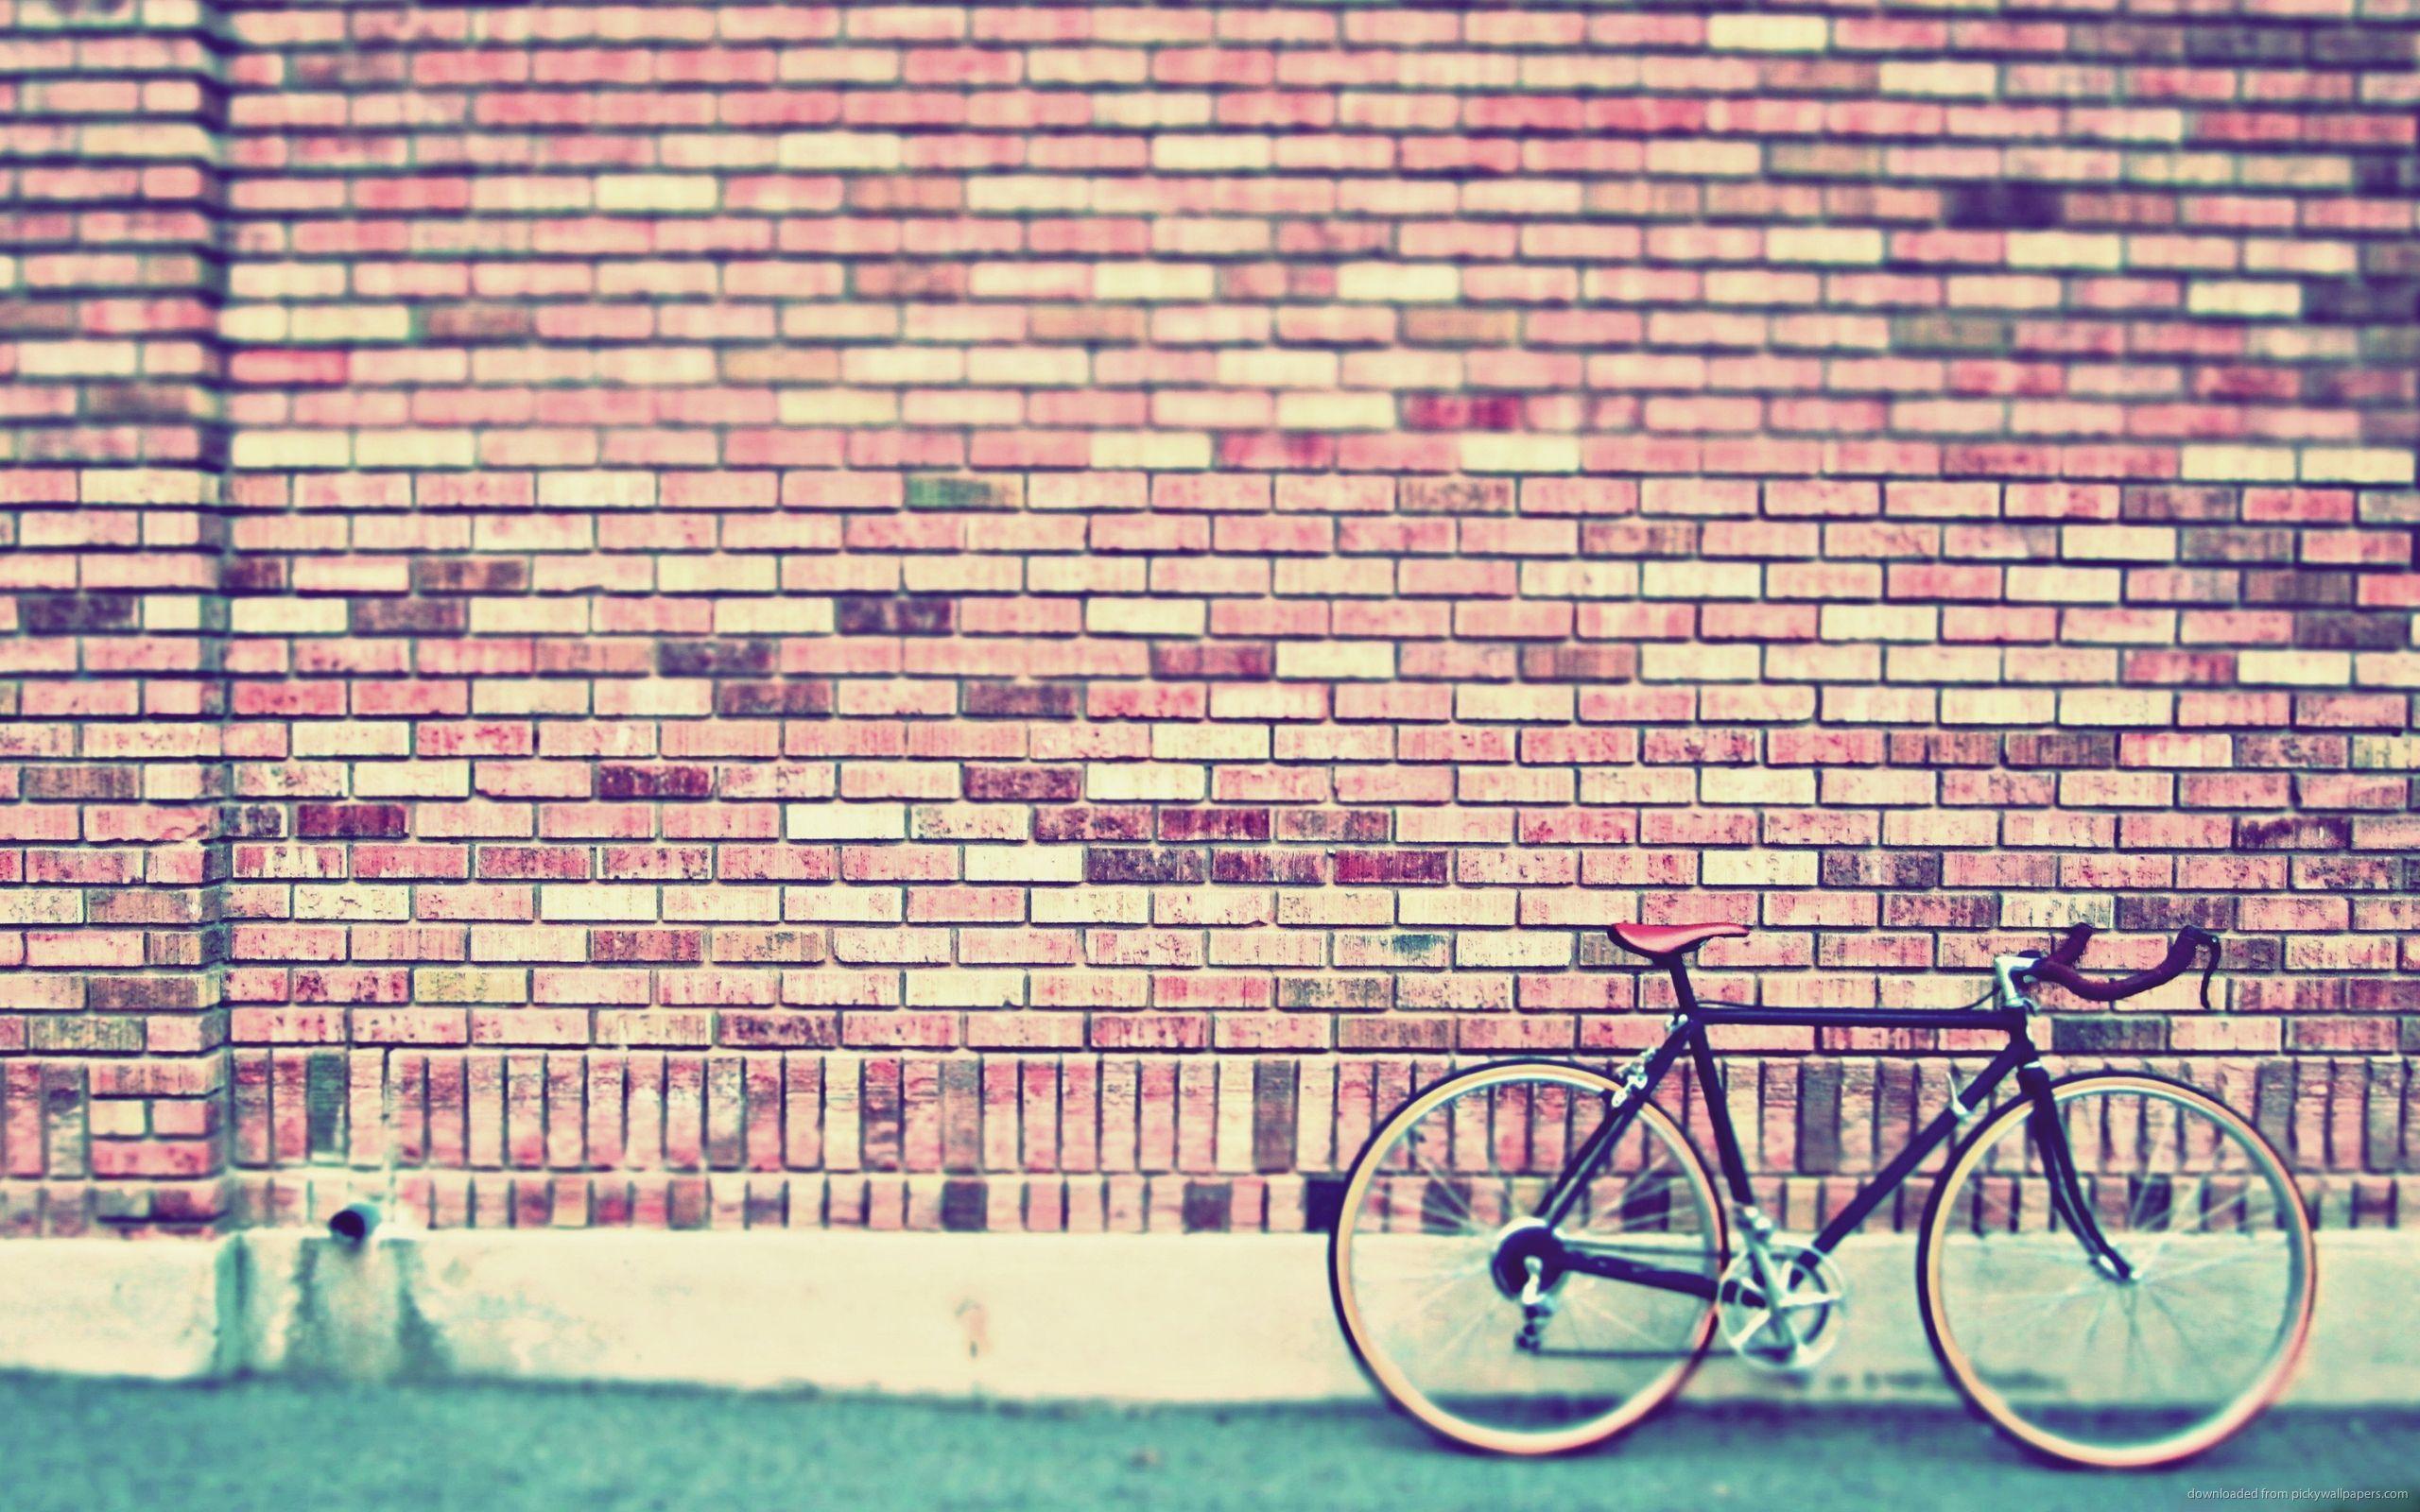 Download 2560x1600 Fixed Gear Bike By The Wall Wallpaper